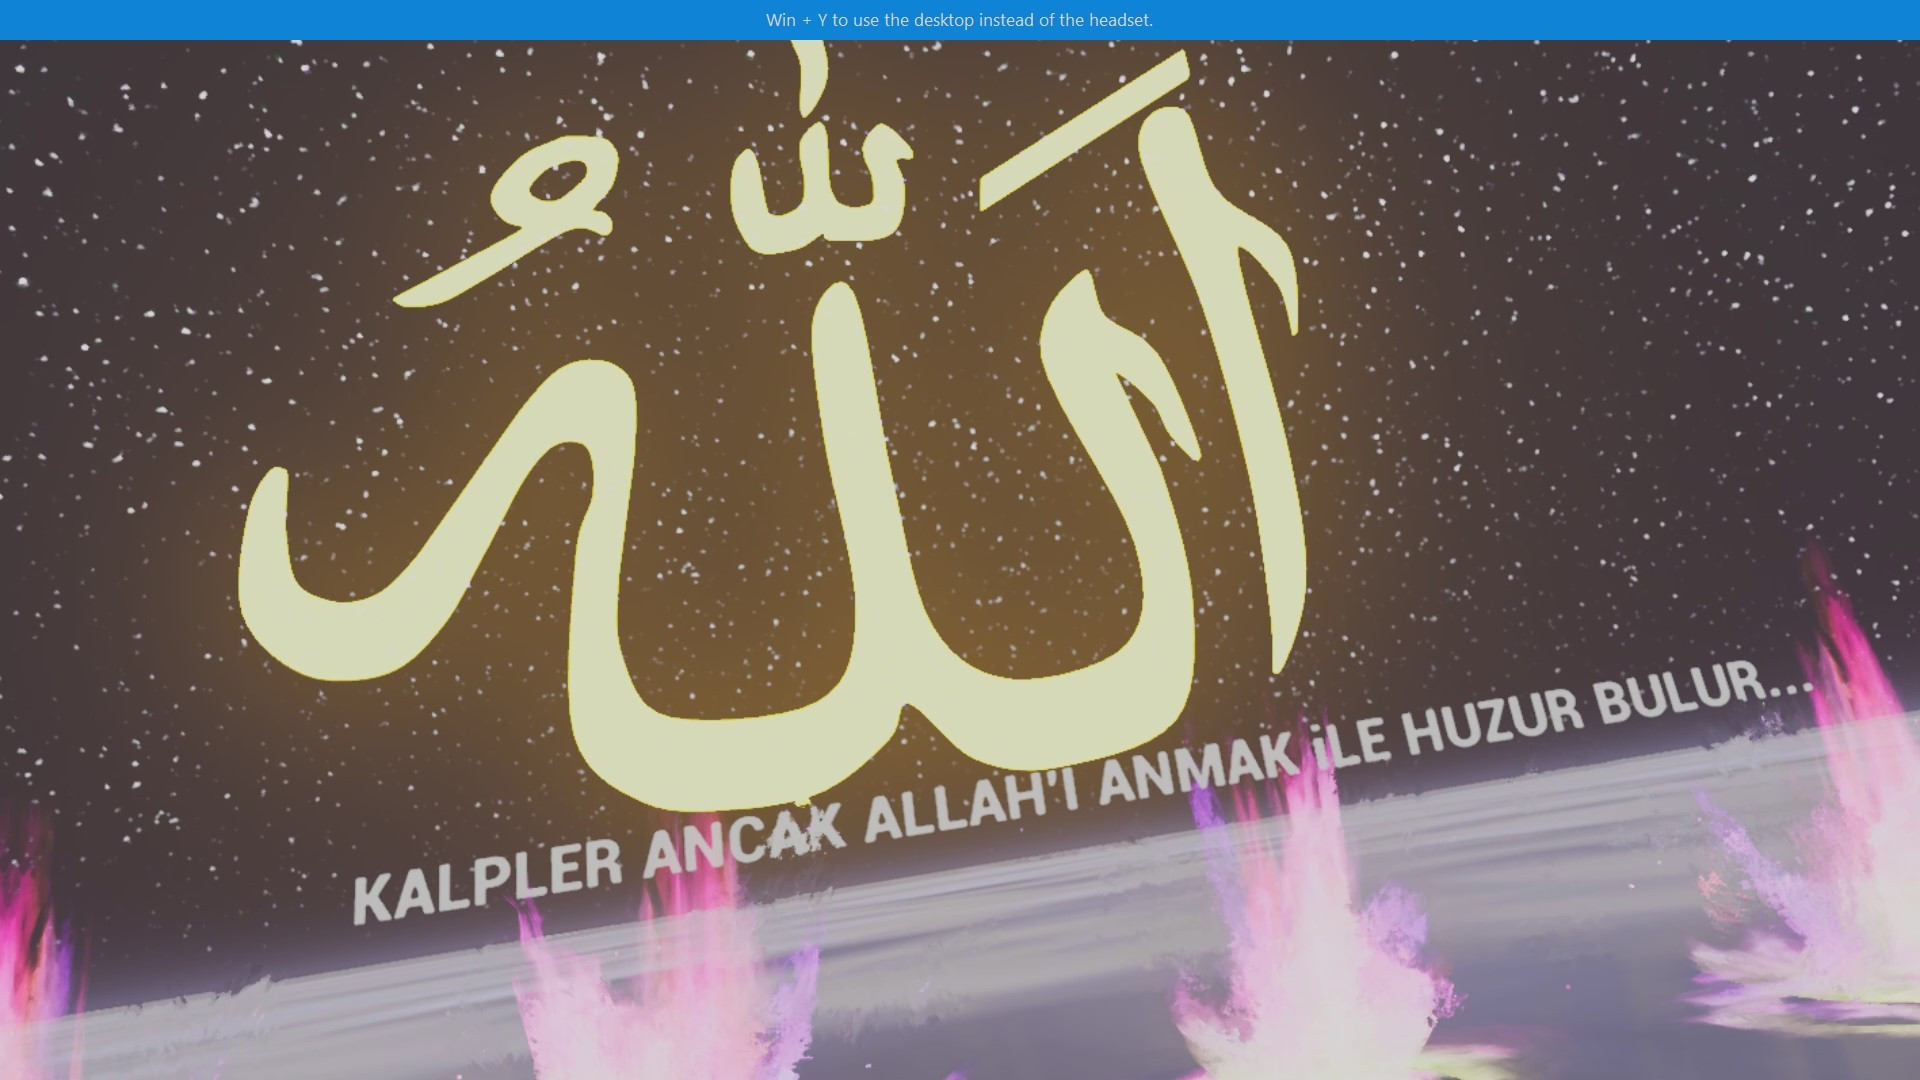 HOLY QURAN VR EXPERİENCE